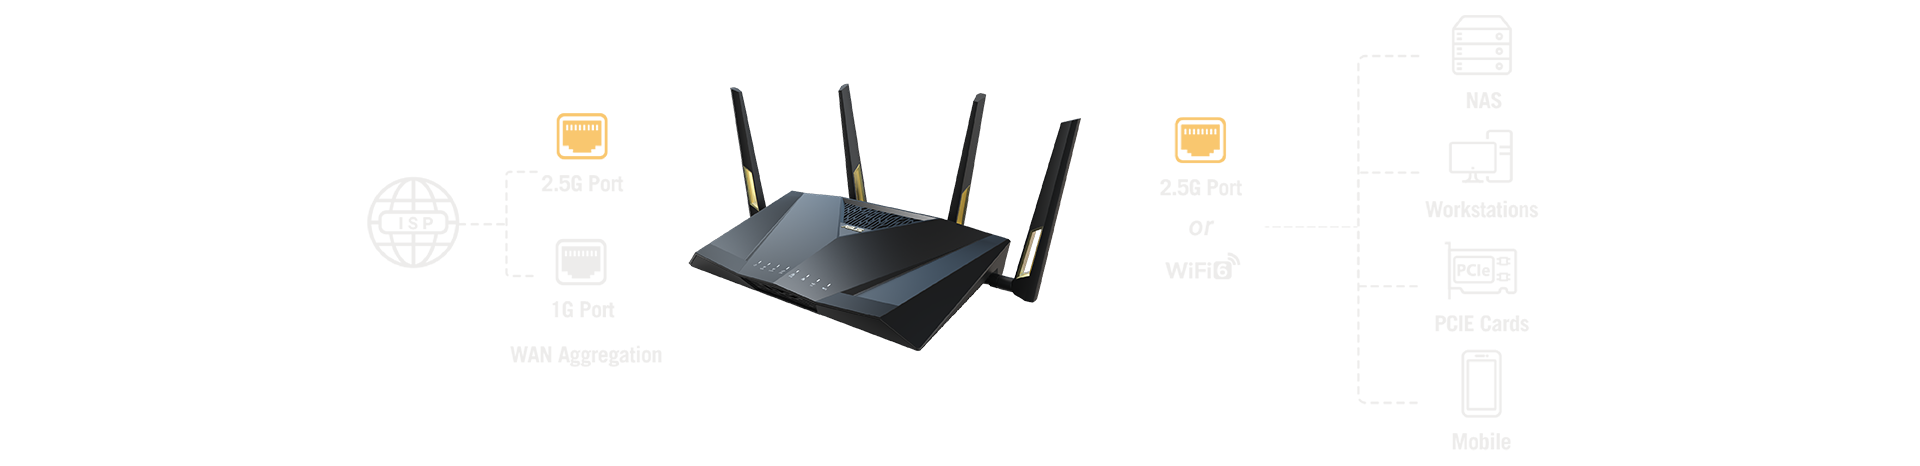 WAN aggregation lets you to combine a 2.5 Gbps port and a 1 Gbps port to unlock up to 3.5 Gbps of WAN bandwidth, fast enough for even the latest ultra-high-speed ISPs.